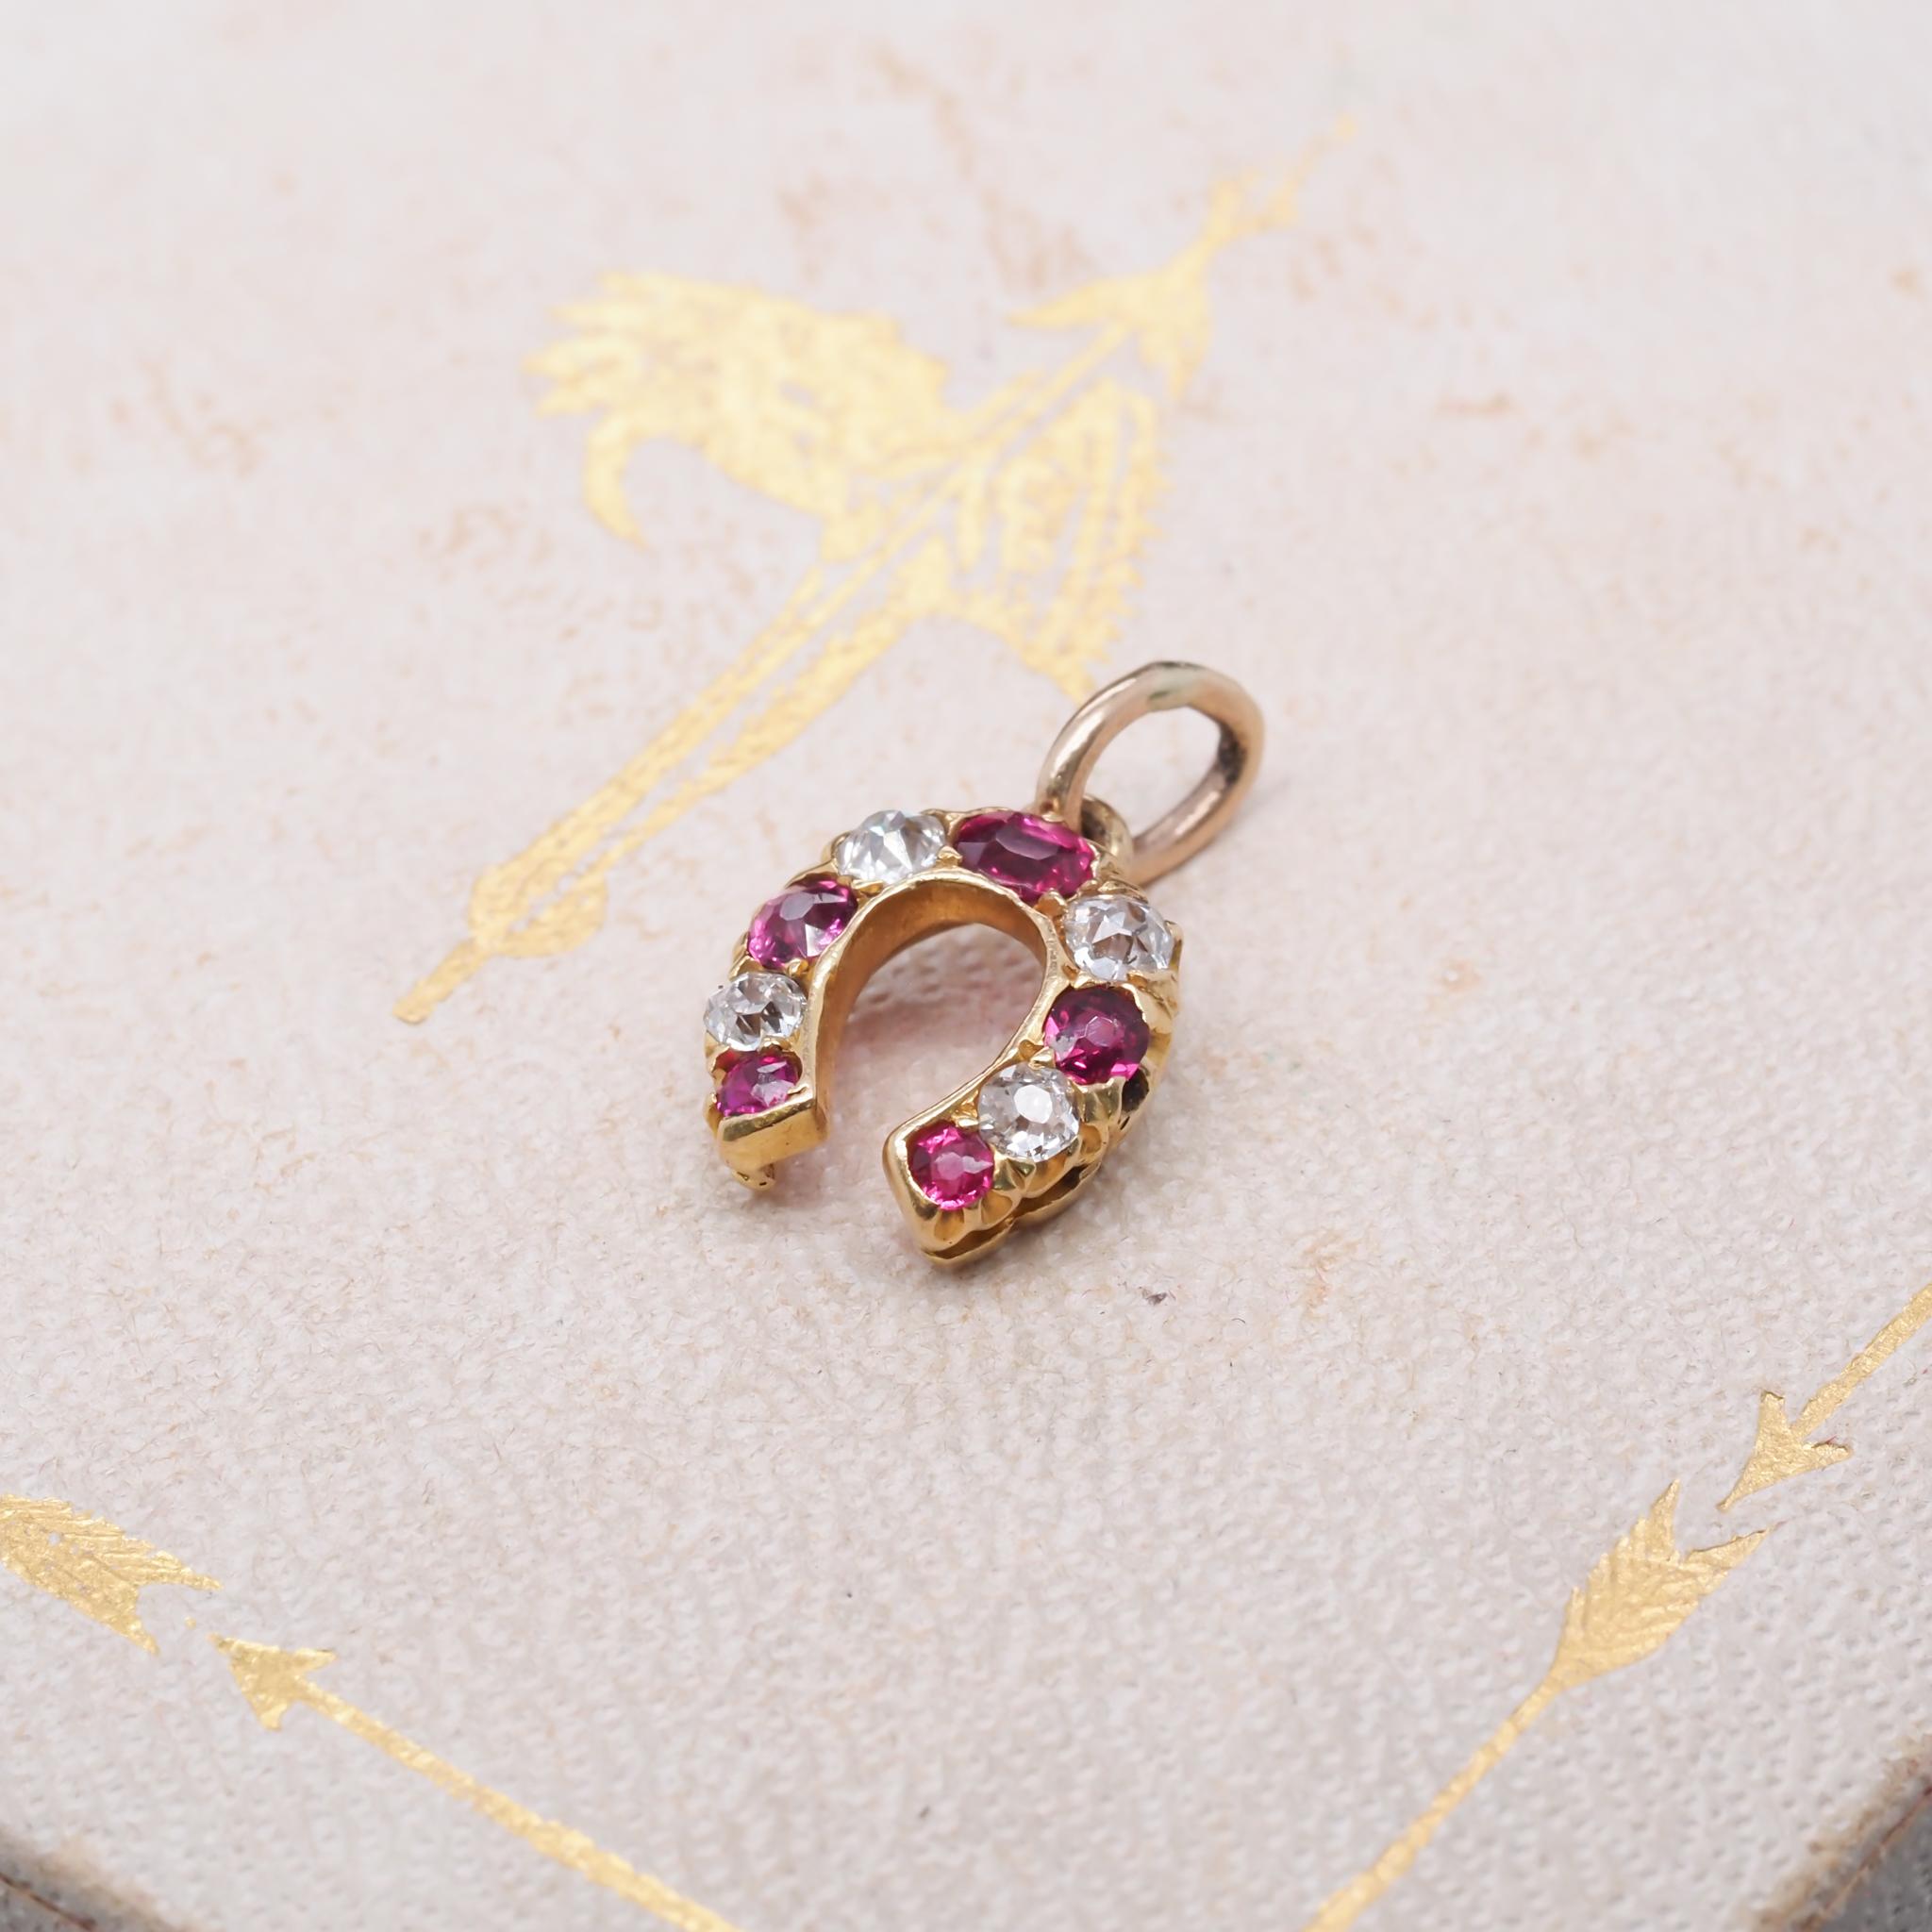 tem Details:
Metal Type: 14K Yellow Gold [Hallmarked, and Tested]
Weight: 1.1 grams
Details:
Natural Rubies, .20ct total weight, Red
Diamonds: Natural, Old Mine Brilliant, .15ct total weight , G-H Color, VS Clarity
Measurement: .5 inch